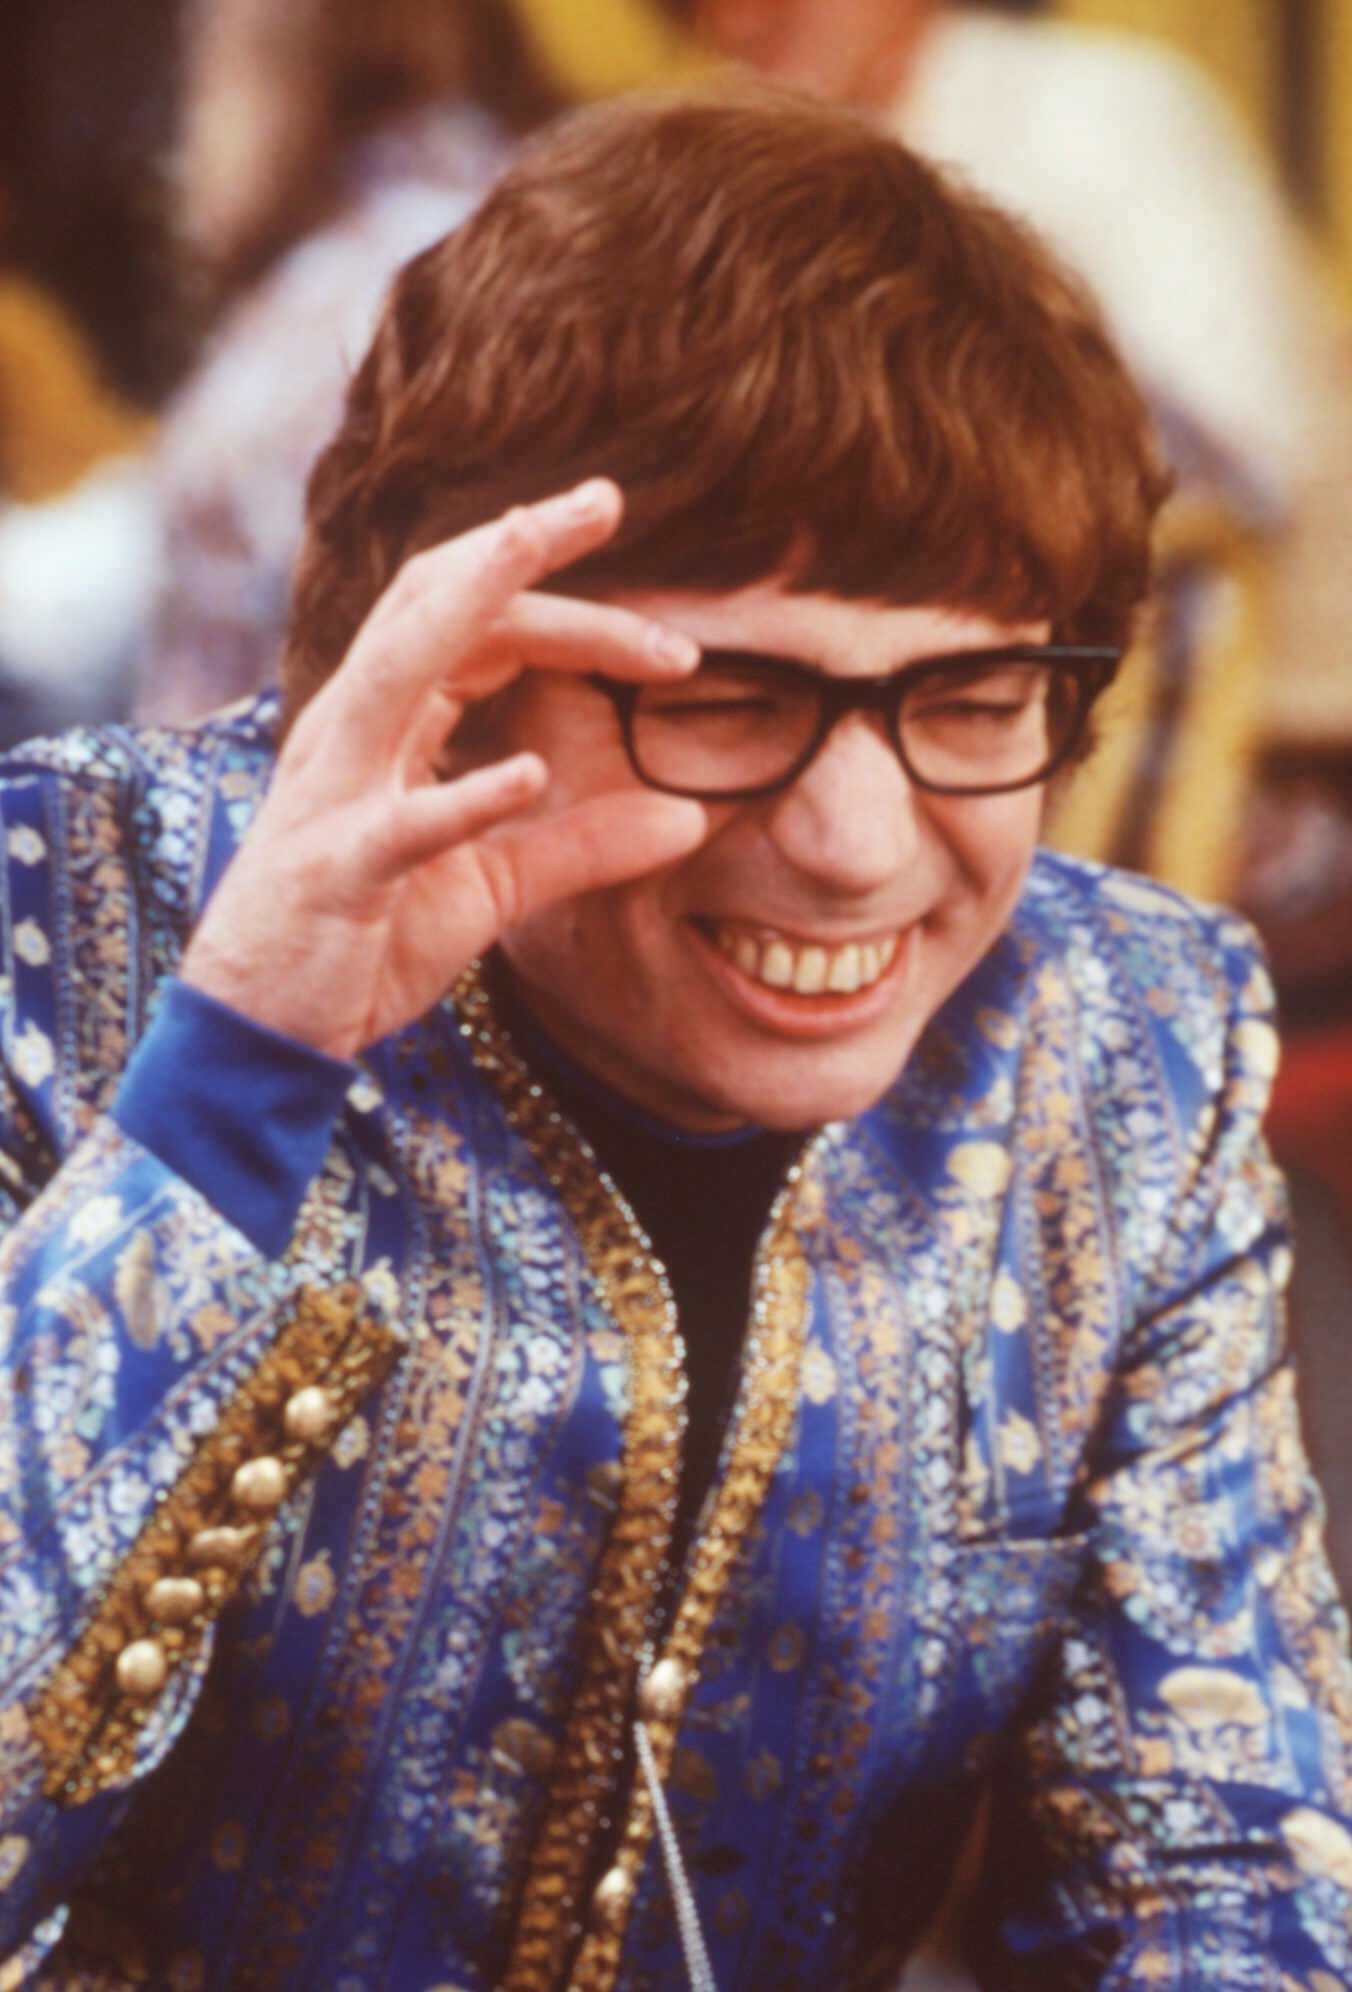 Austin Powers The Spy Who Shagged Me Full Movie Download Free